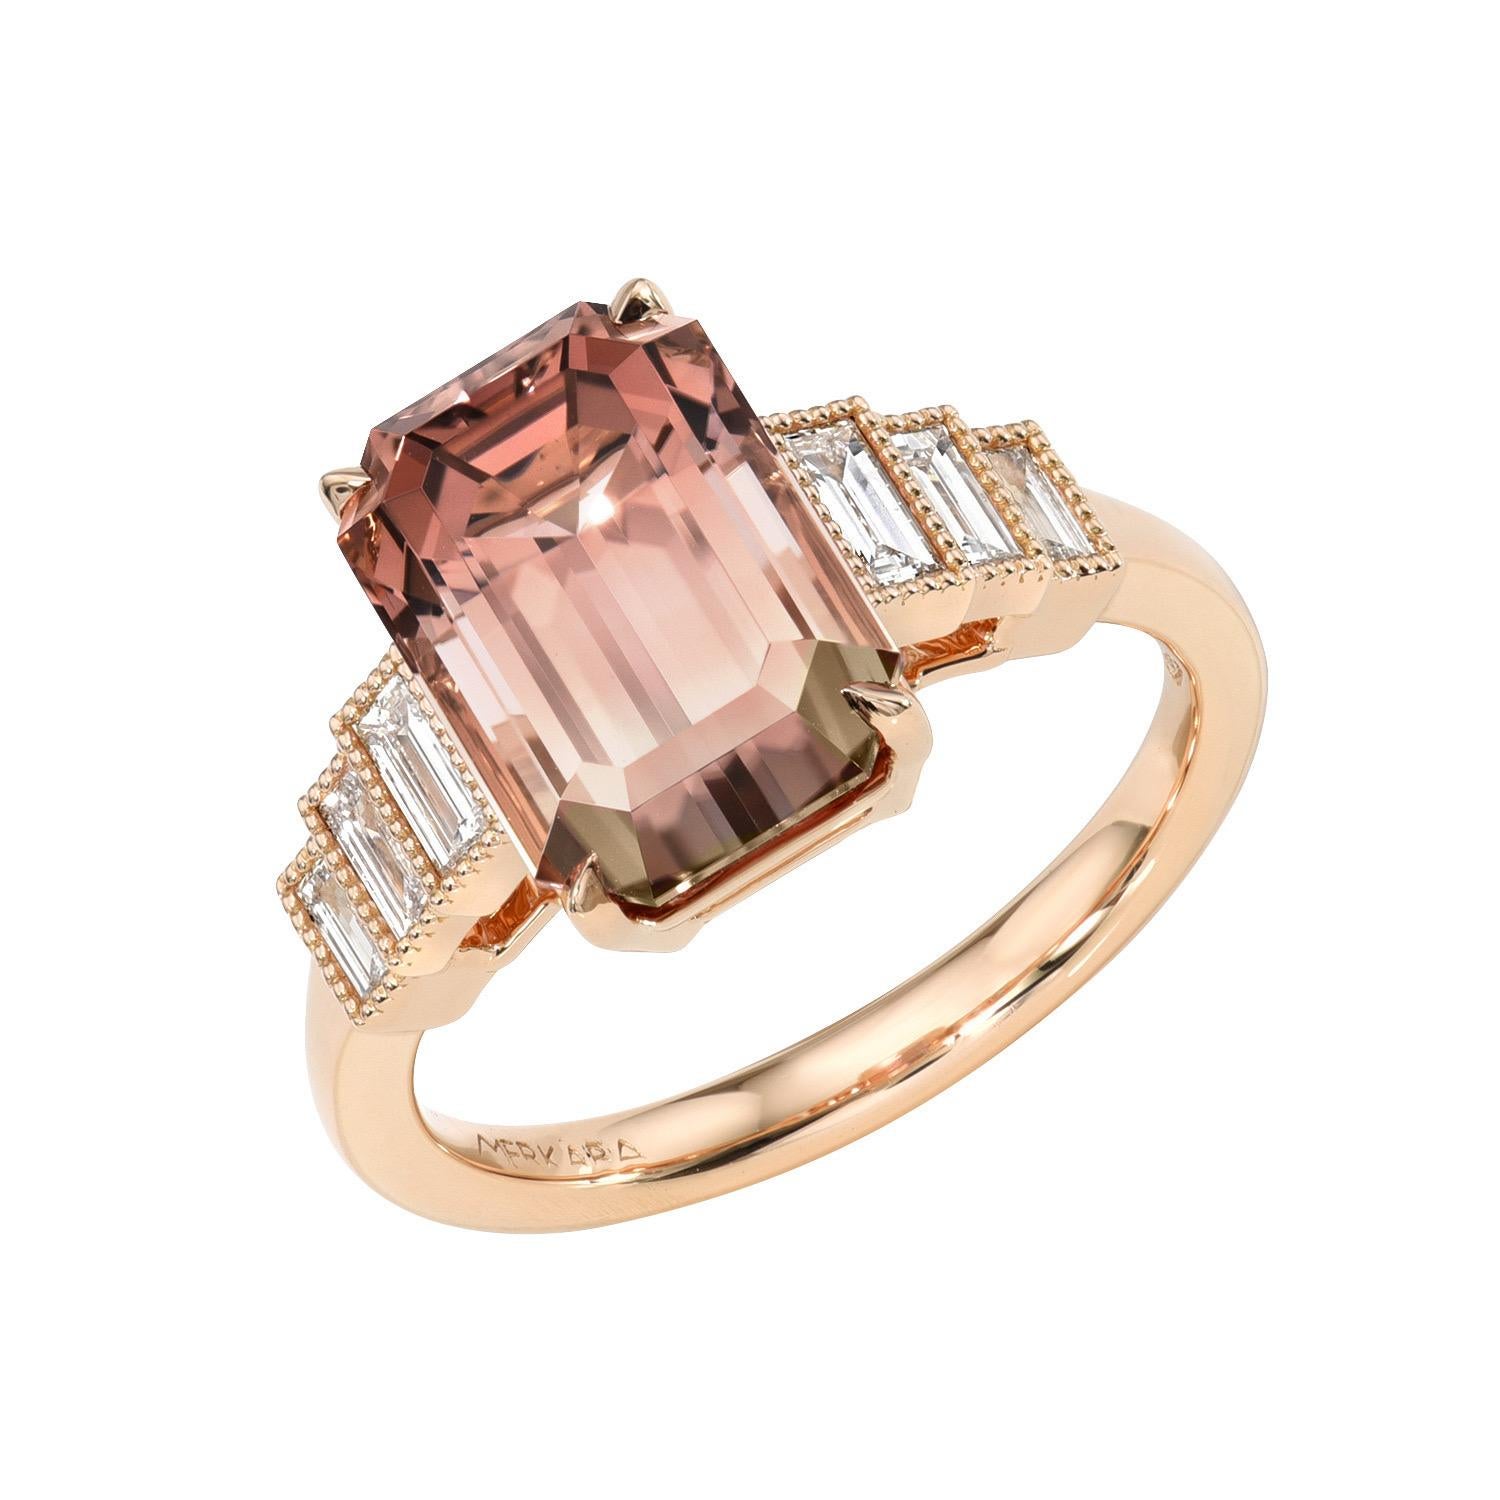 Precious 5.07 carat Bicolor Tourmaline Emerald Cut, 18K rose gold ring, decorated with a total of 0.39 carat collection baguette diamonds.
Ring size 6.5. Resizing is complementary upon request.
Returns are accepted and paid by us within 7 days of